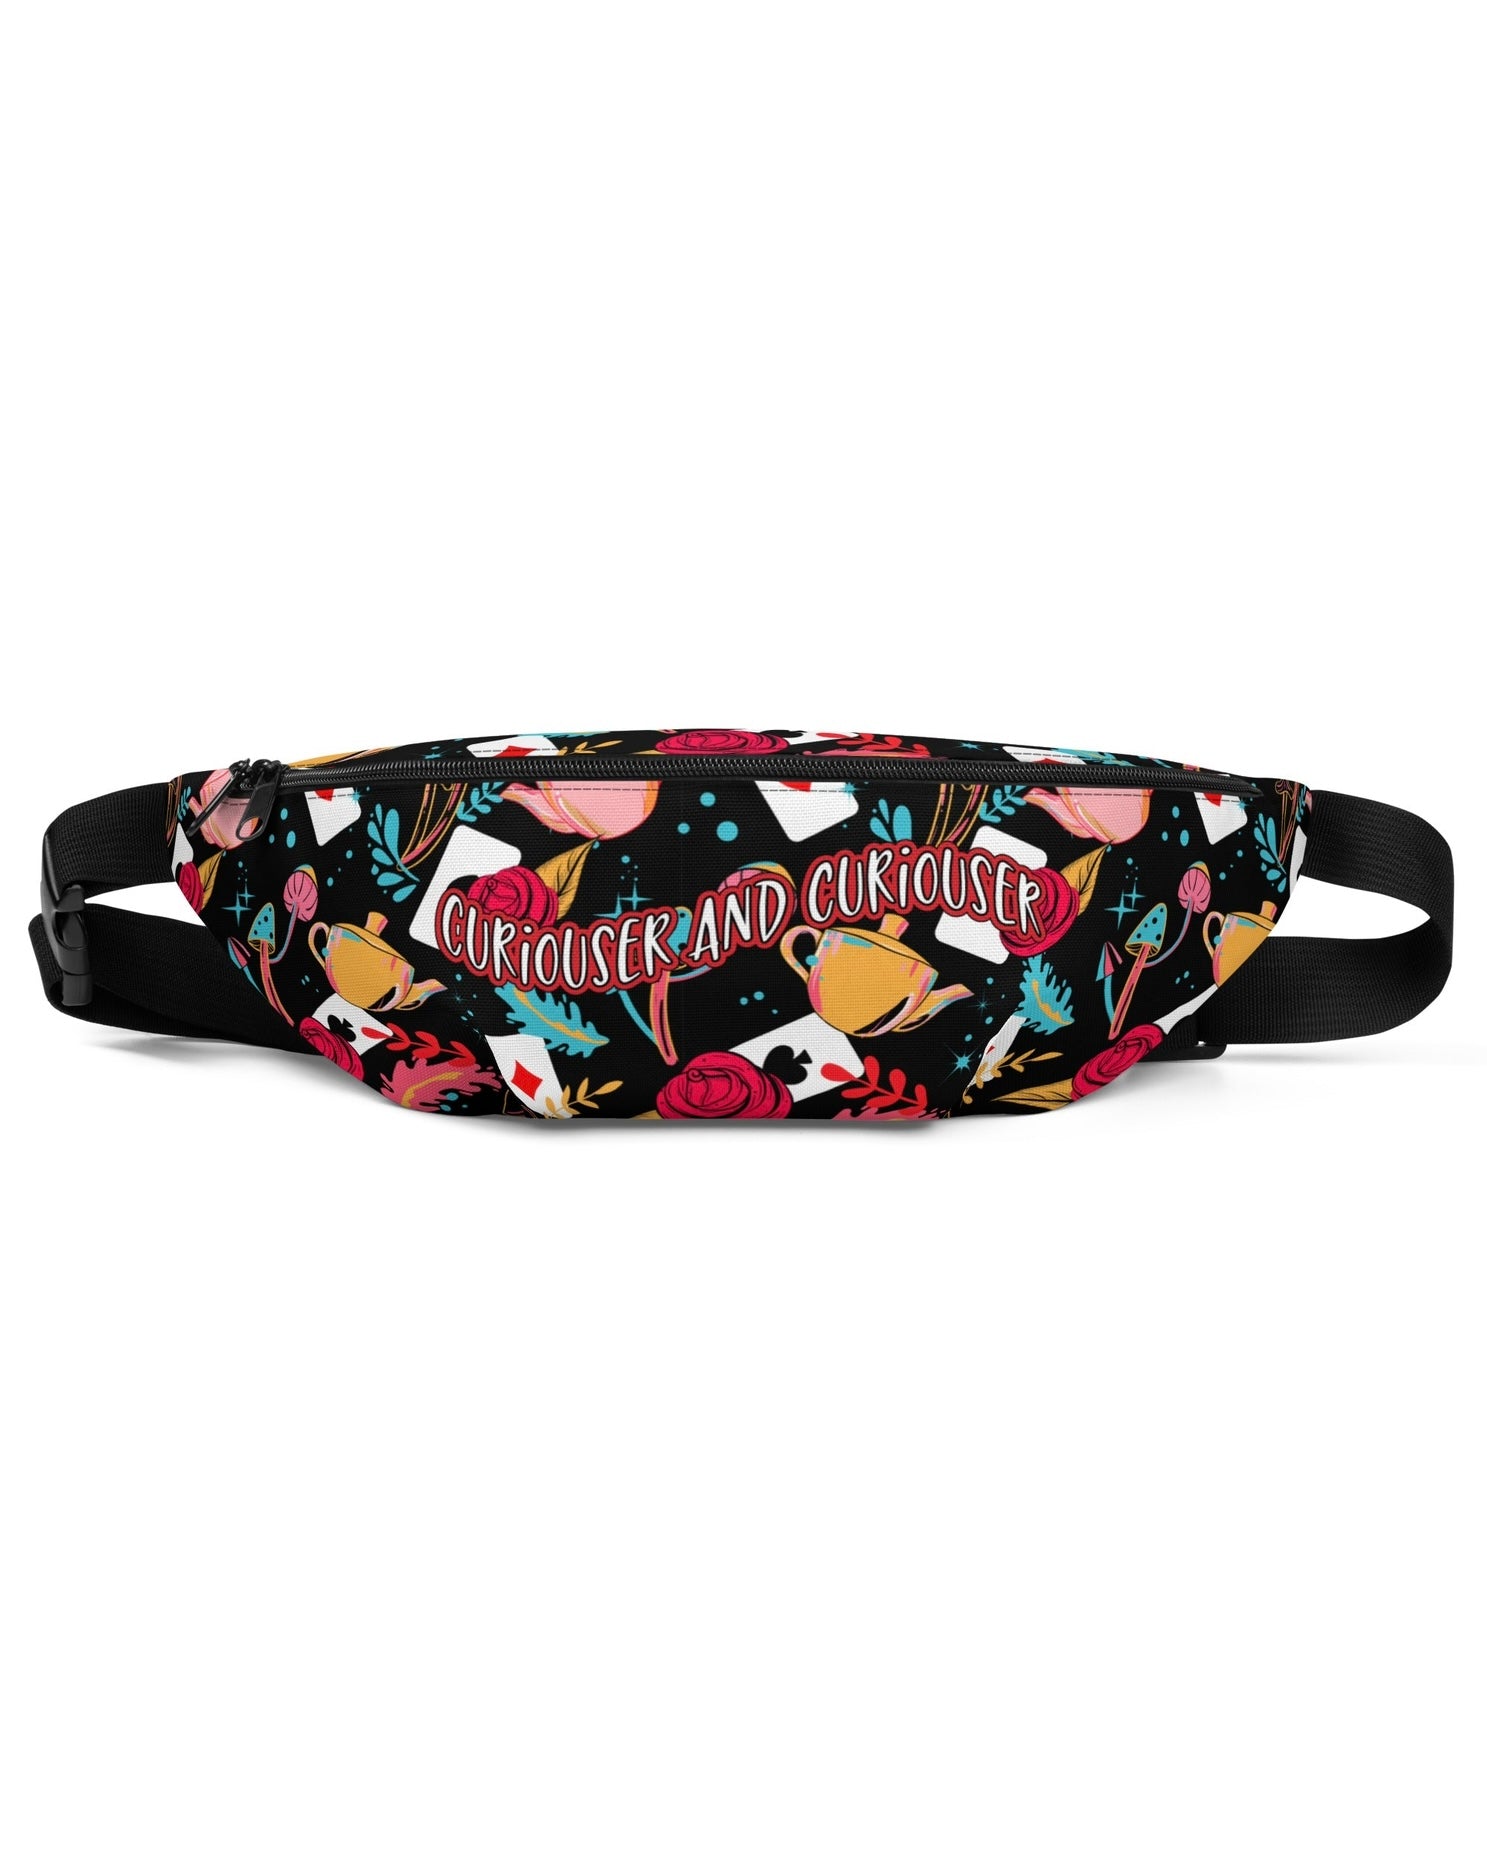 Curiouser and Curiouser Fanny Pack, Fanny Pack, - One Stop Rave